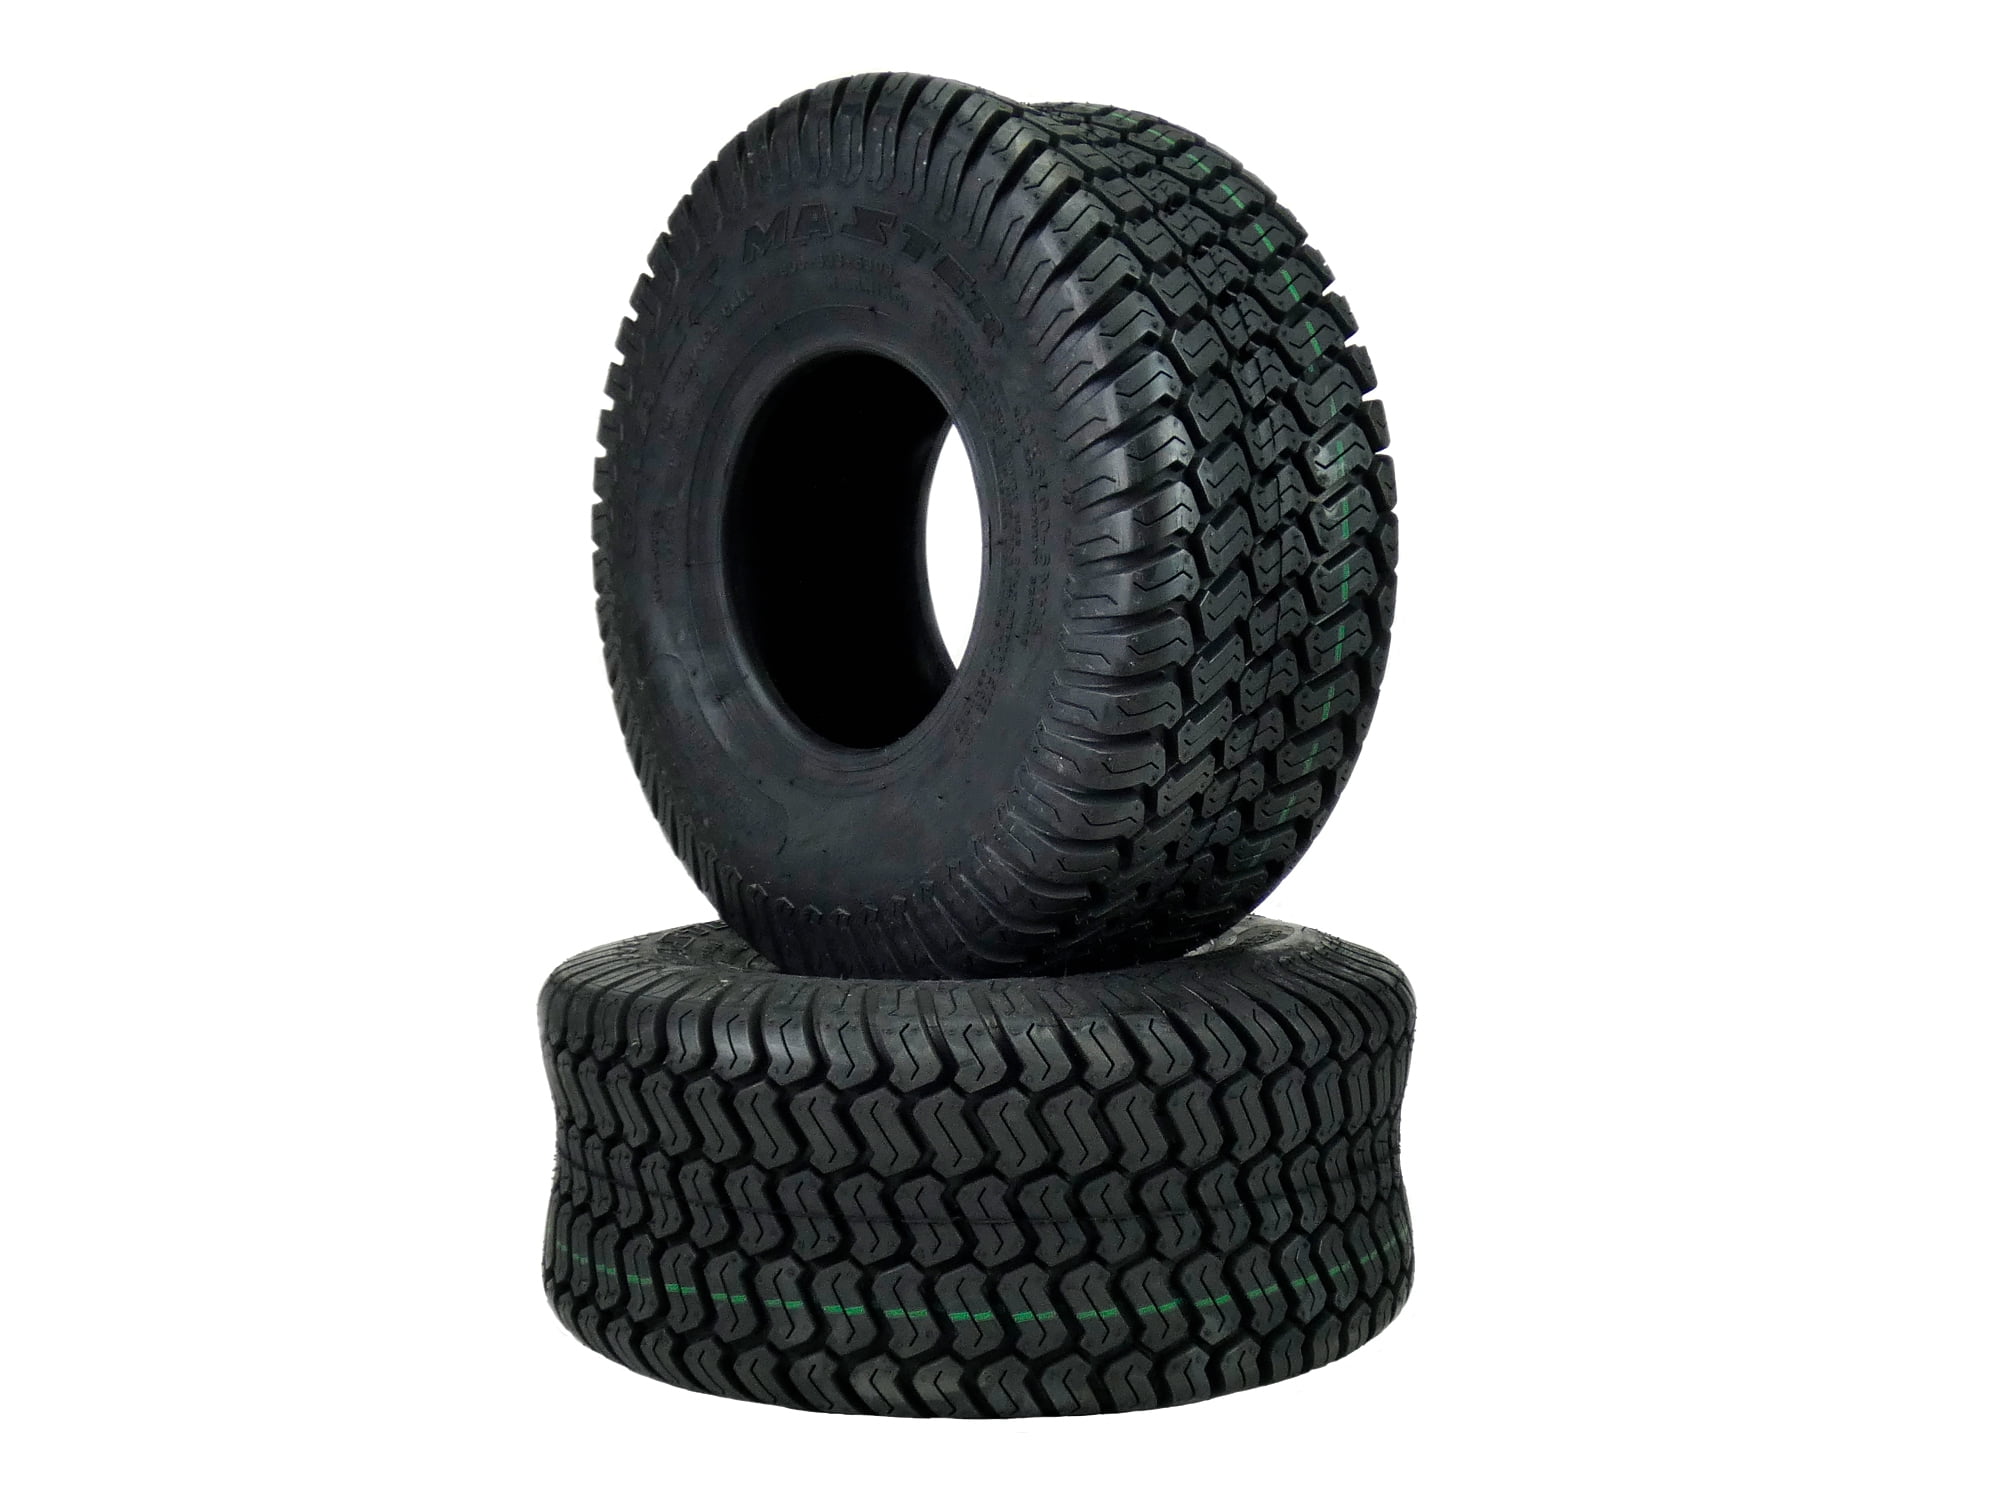 SET Of TWO 20x8.00-8 Soft Turf Tires for Lawn Mower Riding Mower 20x800-8 